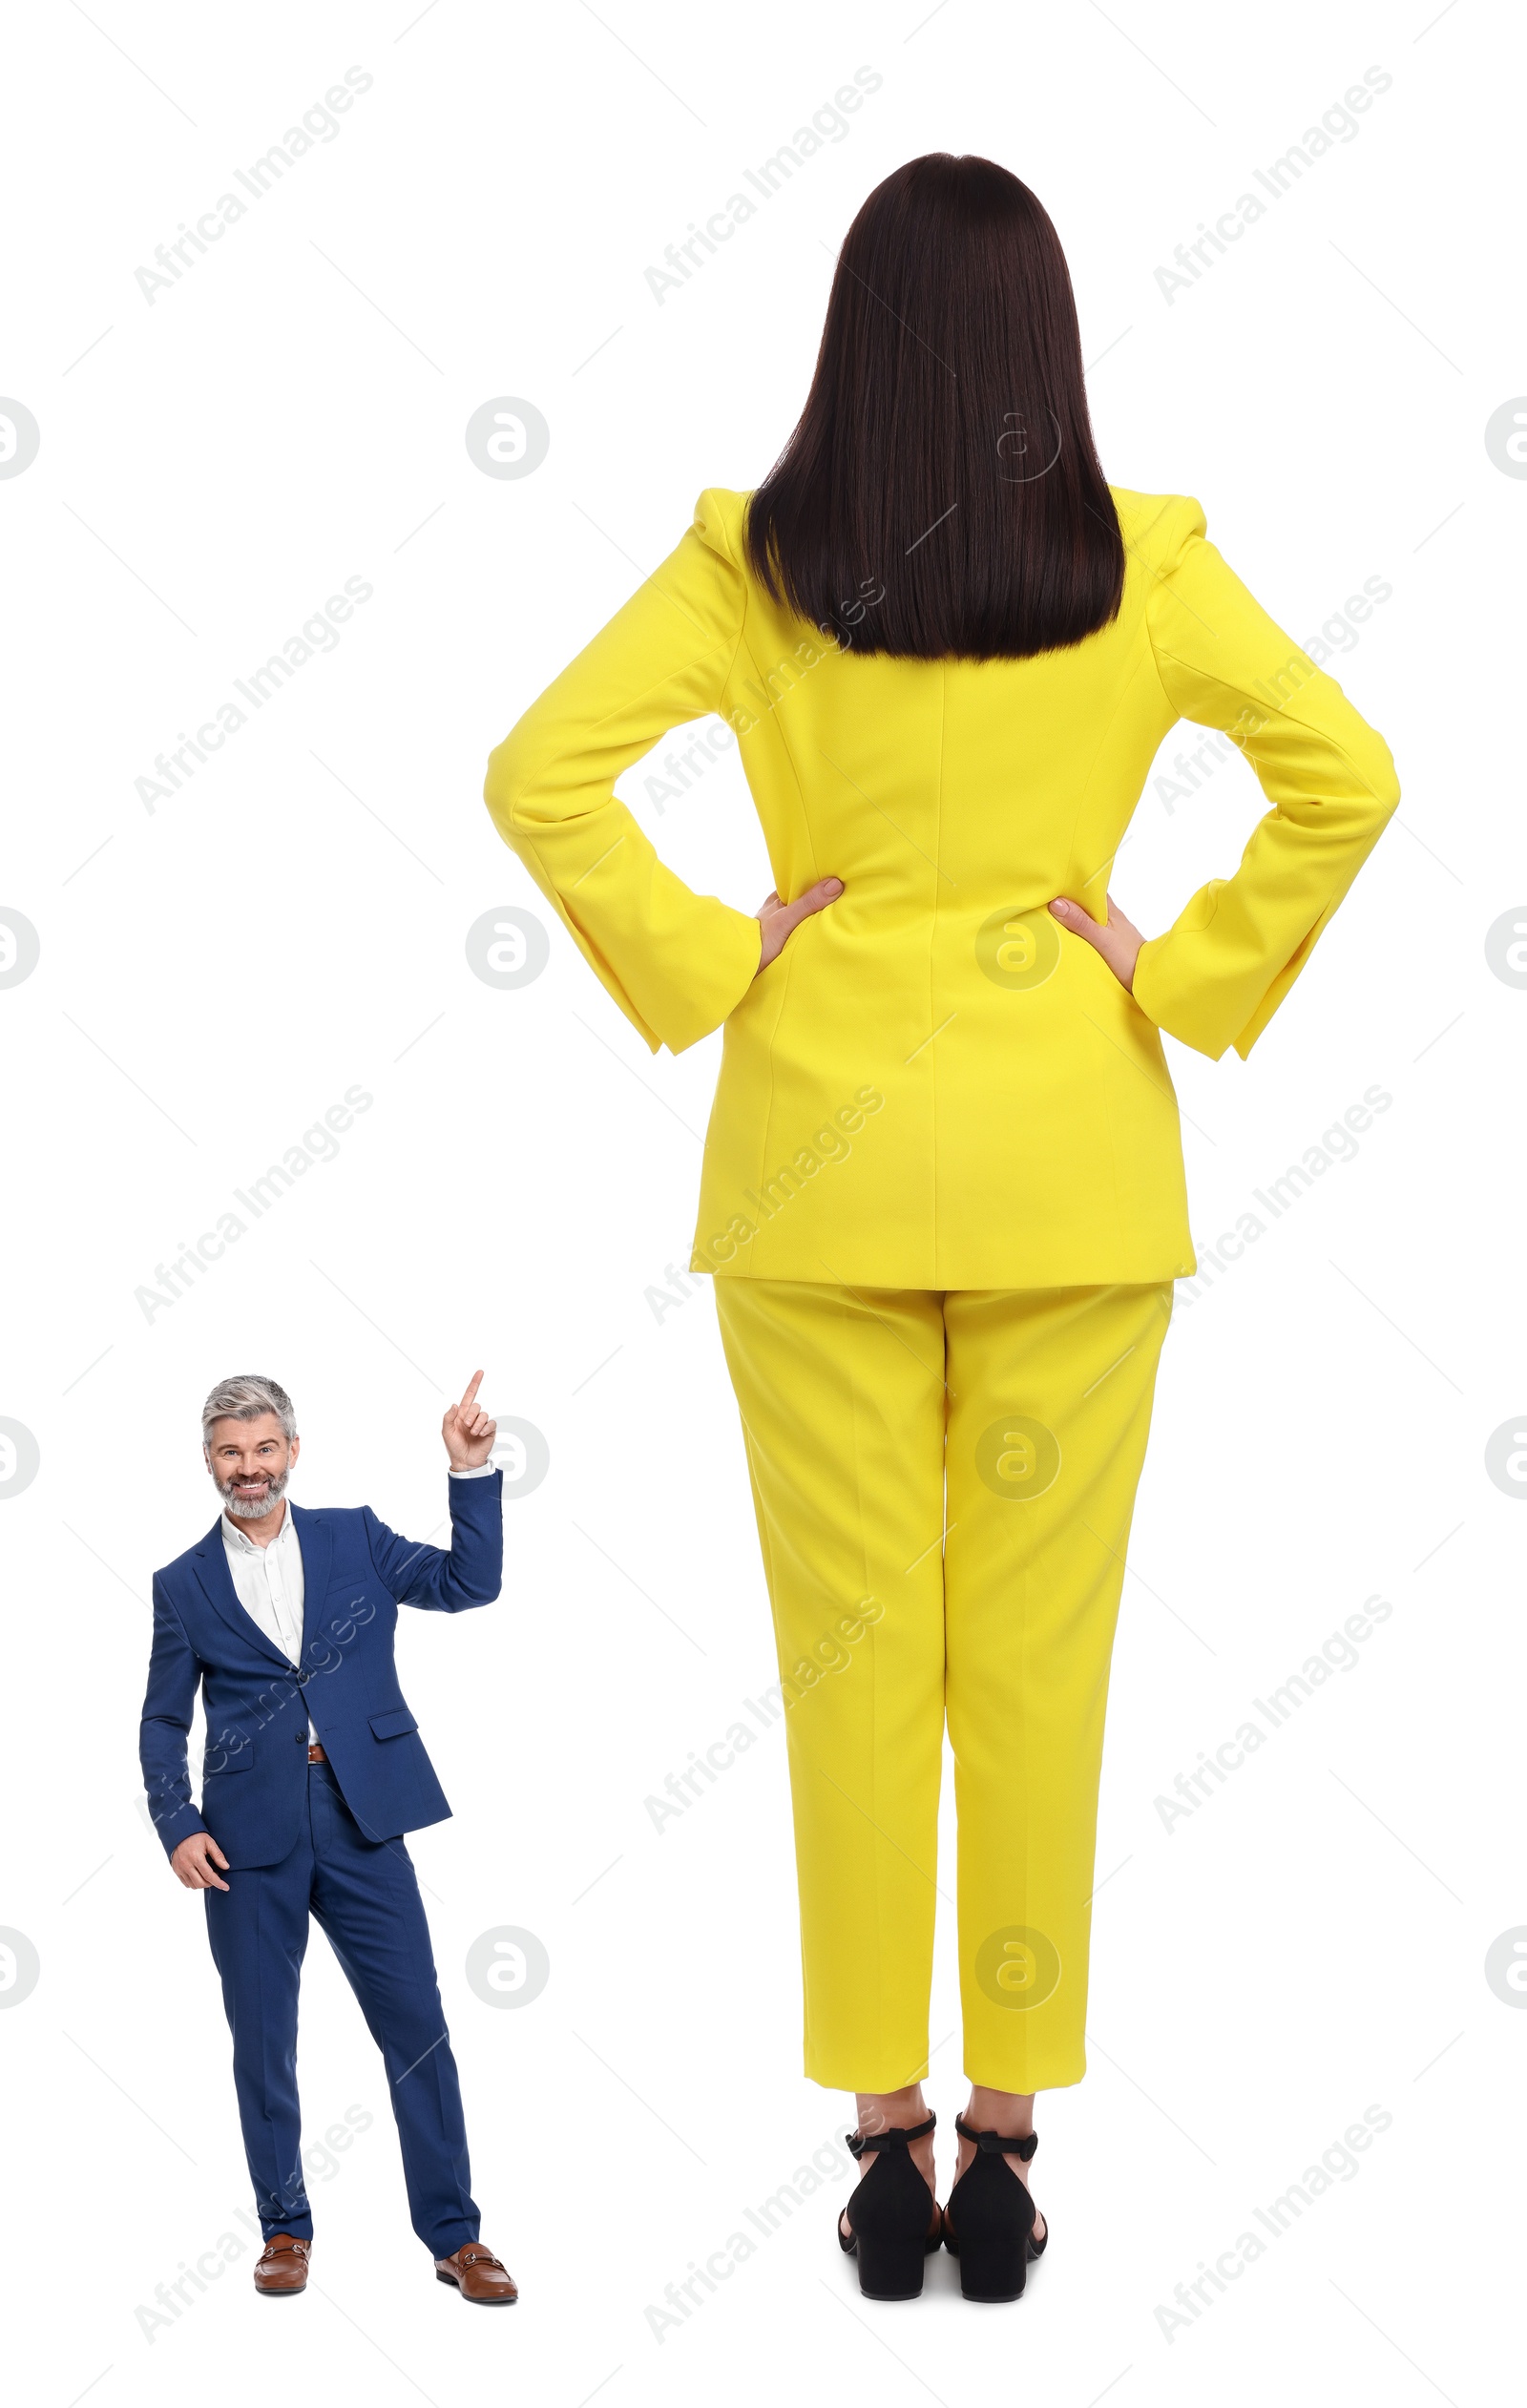 Image of Small man pointing at giant woman on white background